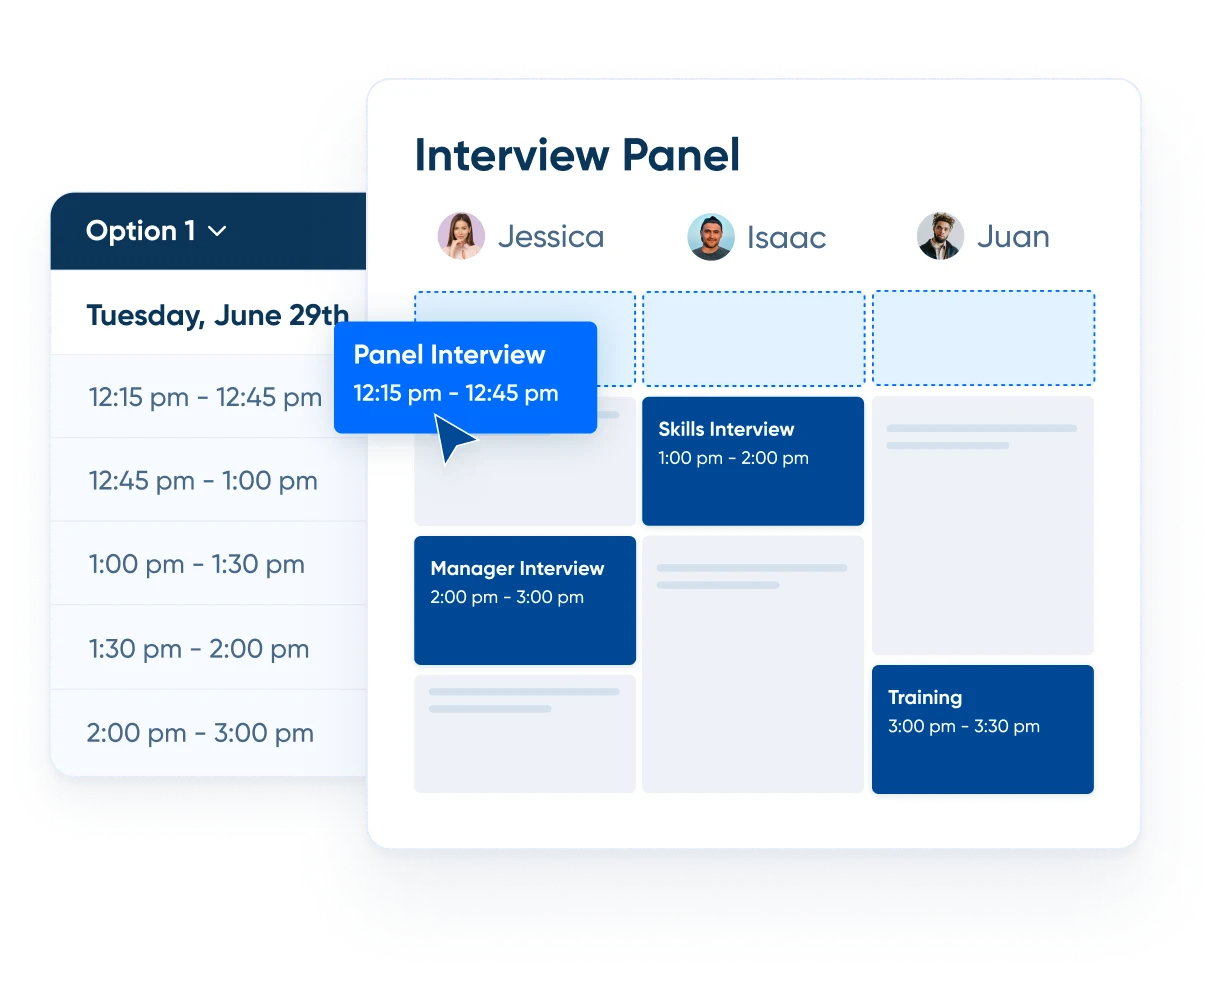 Stylized screenshot showing scheduling options for a panel interview with three interviewers.